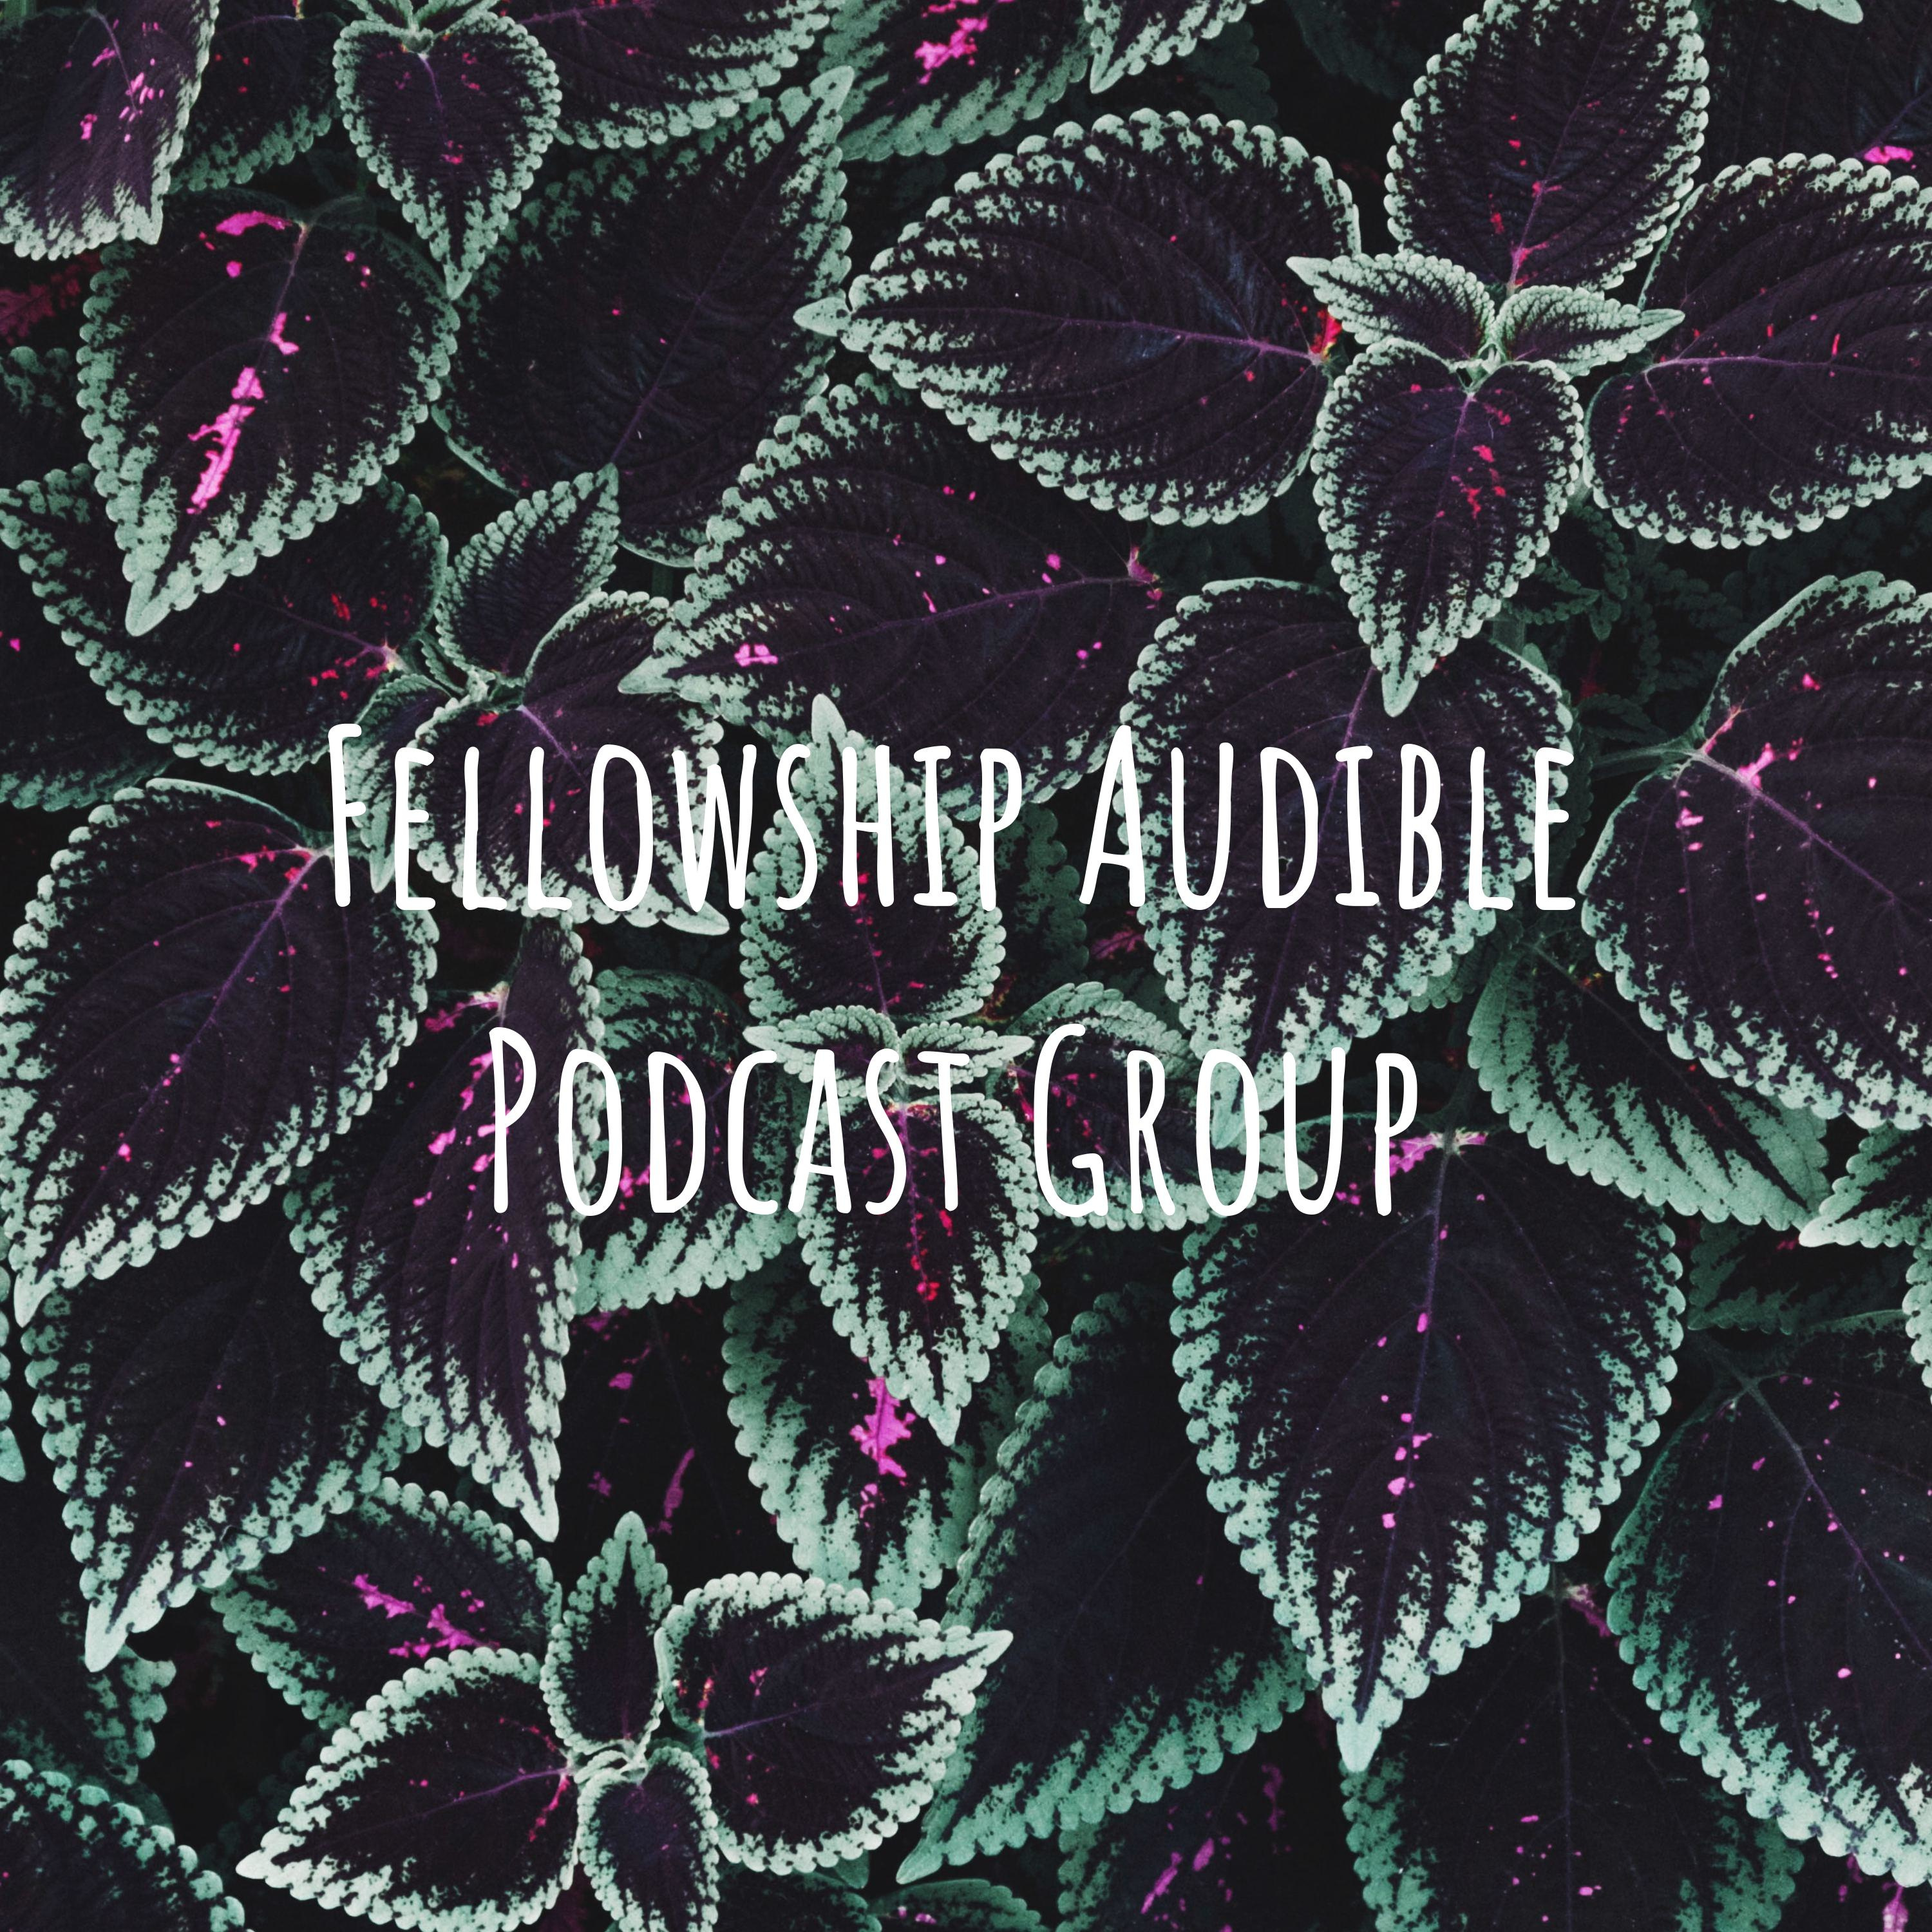 BONUS EPISODE: A reply to The Friendship Feed | Fellowship Audio Podcast